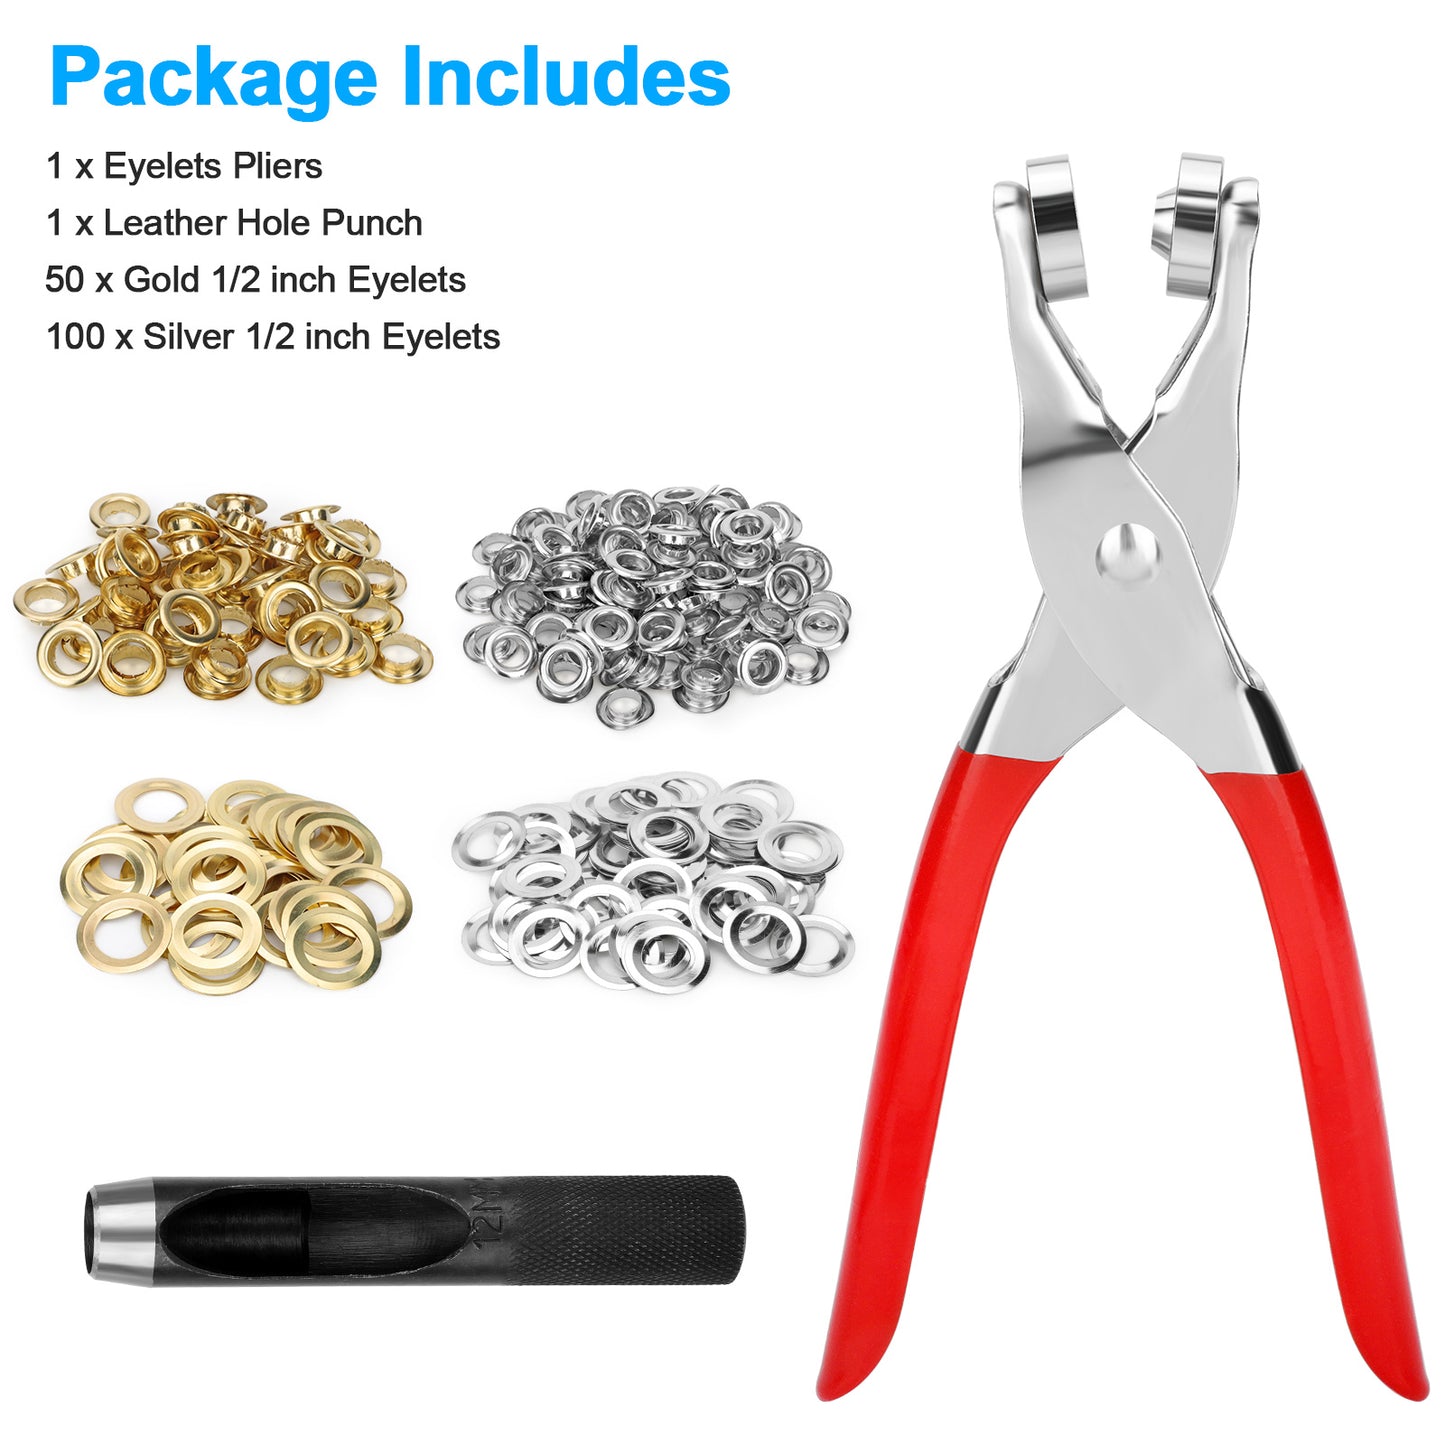 1/2 Inch Grommet Tool Kit - Leather Hole Punch Pliers ,150 Metal Eyelets in Gold and Silver for Leather, Shoes, Fabric, Belt , DIY Craft and Repairs